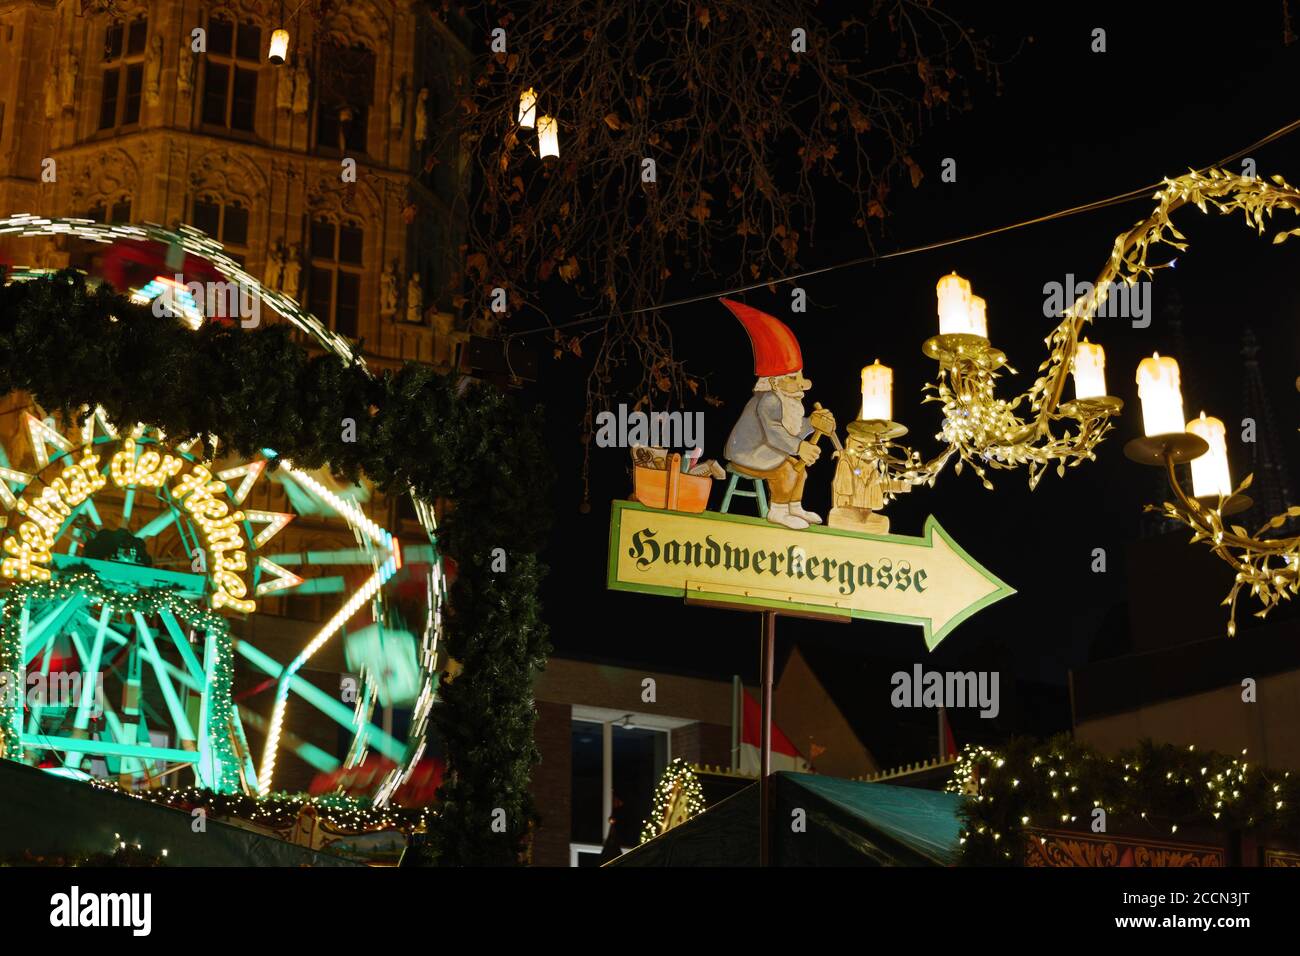 Night atmosphere and selective focus at Santa Claus sign over illuminate stalls at Heumarkt, famous Christmas market square in Köln, Germany. Stock Photo